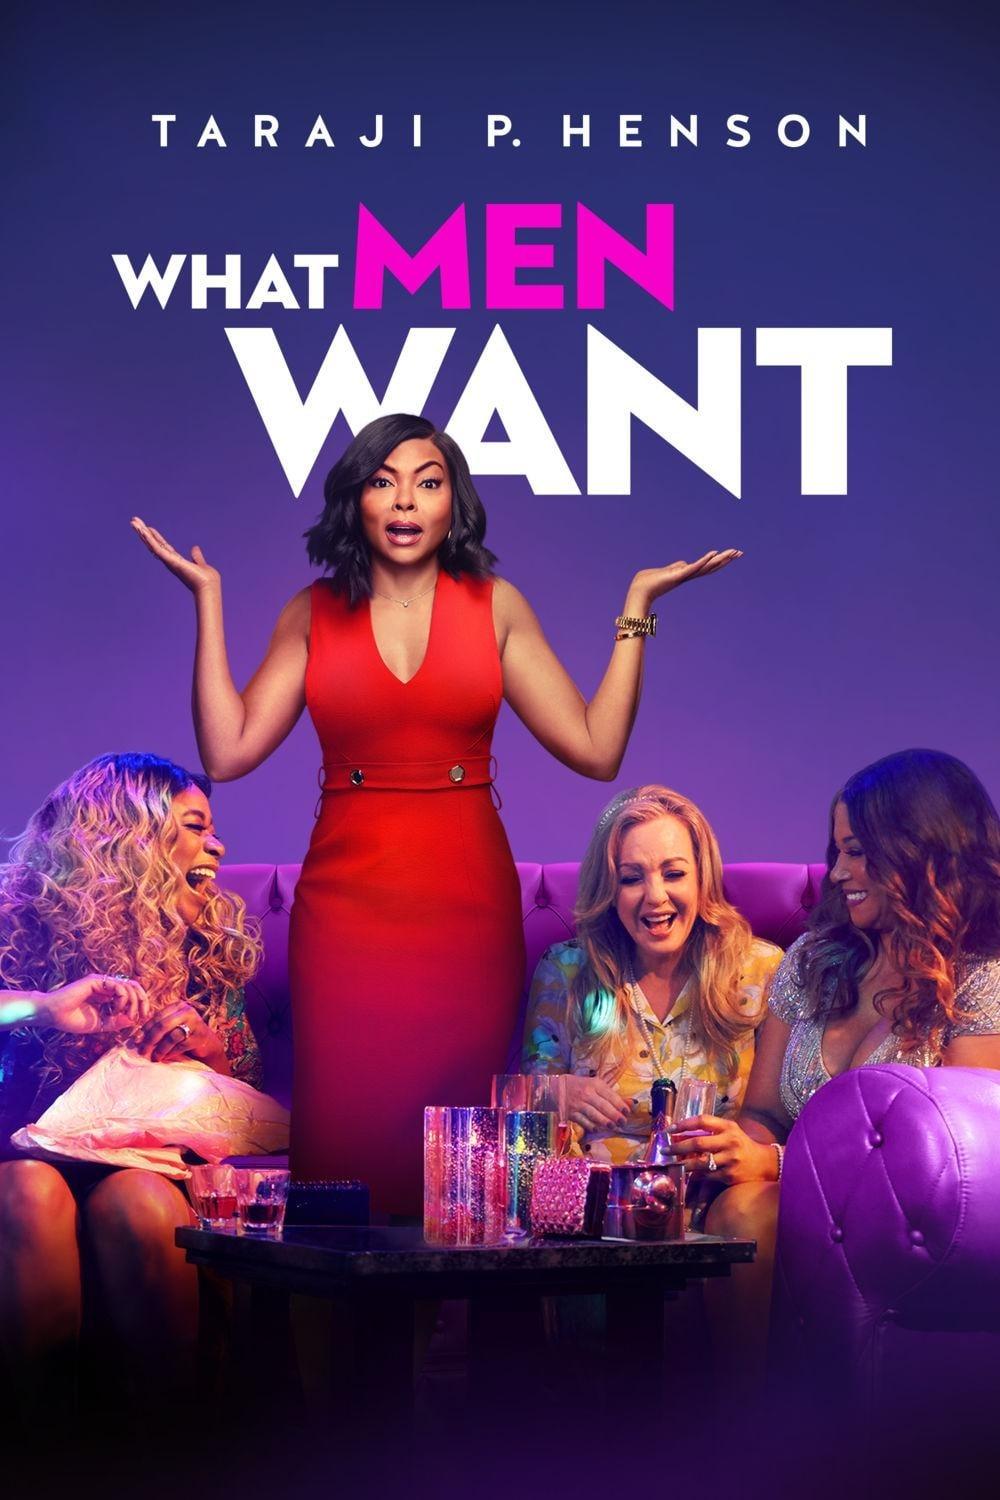 What Men Want poster